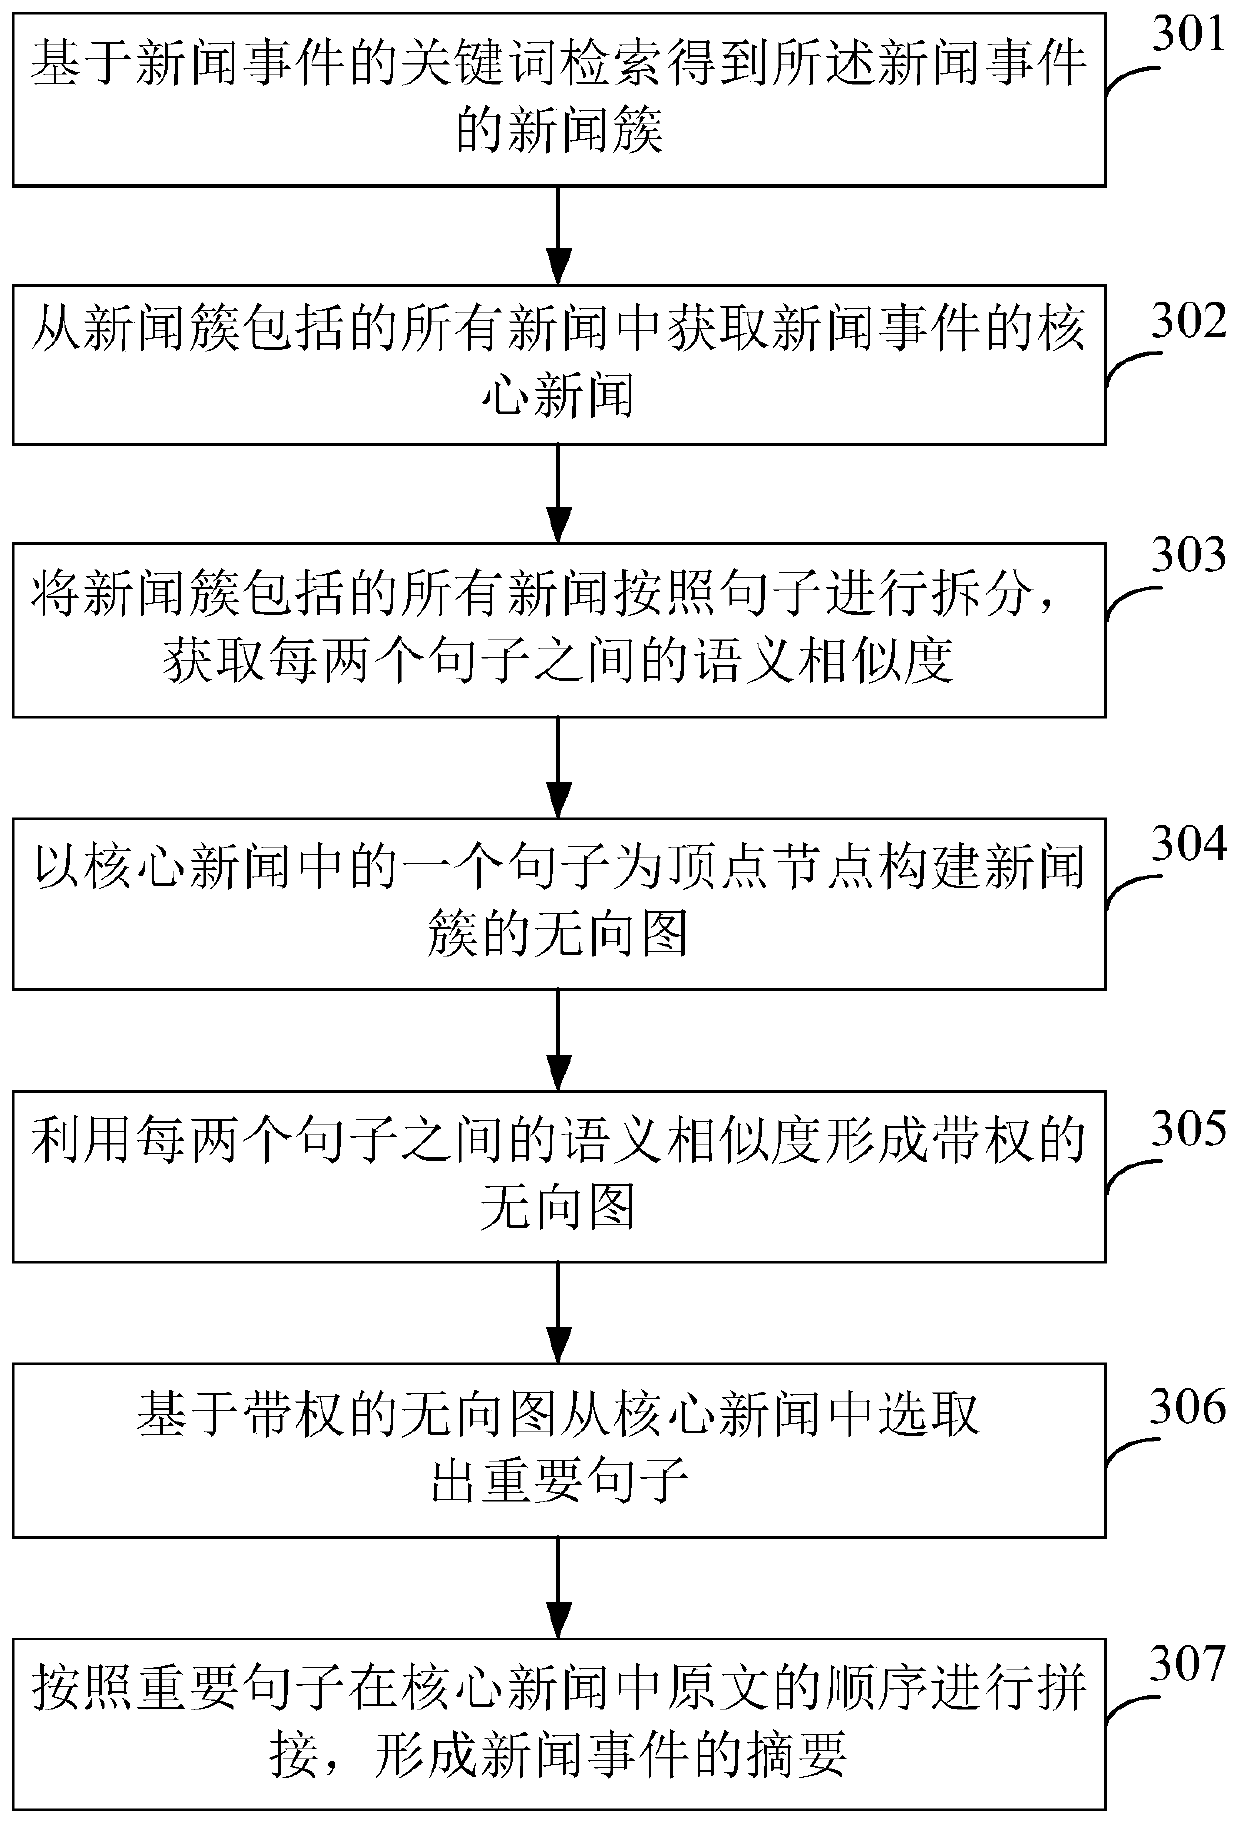 Method and device for extracting news summaries based on artificial intelligence